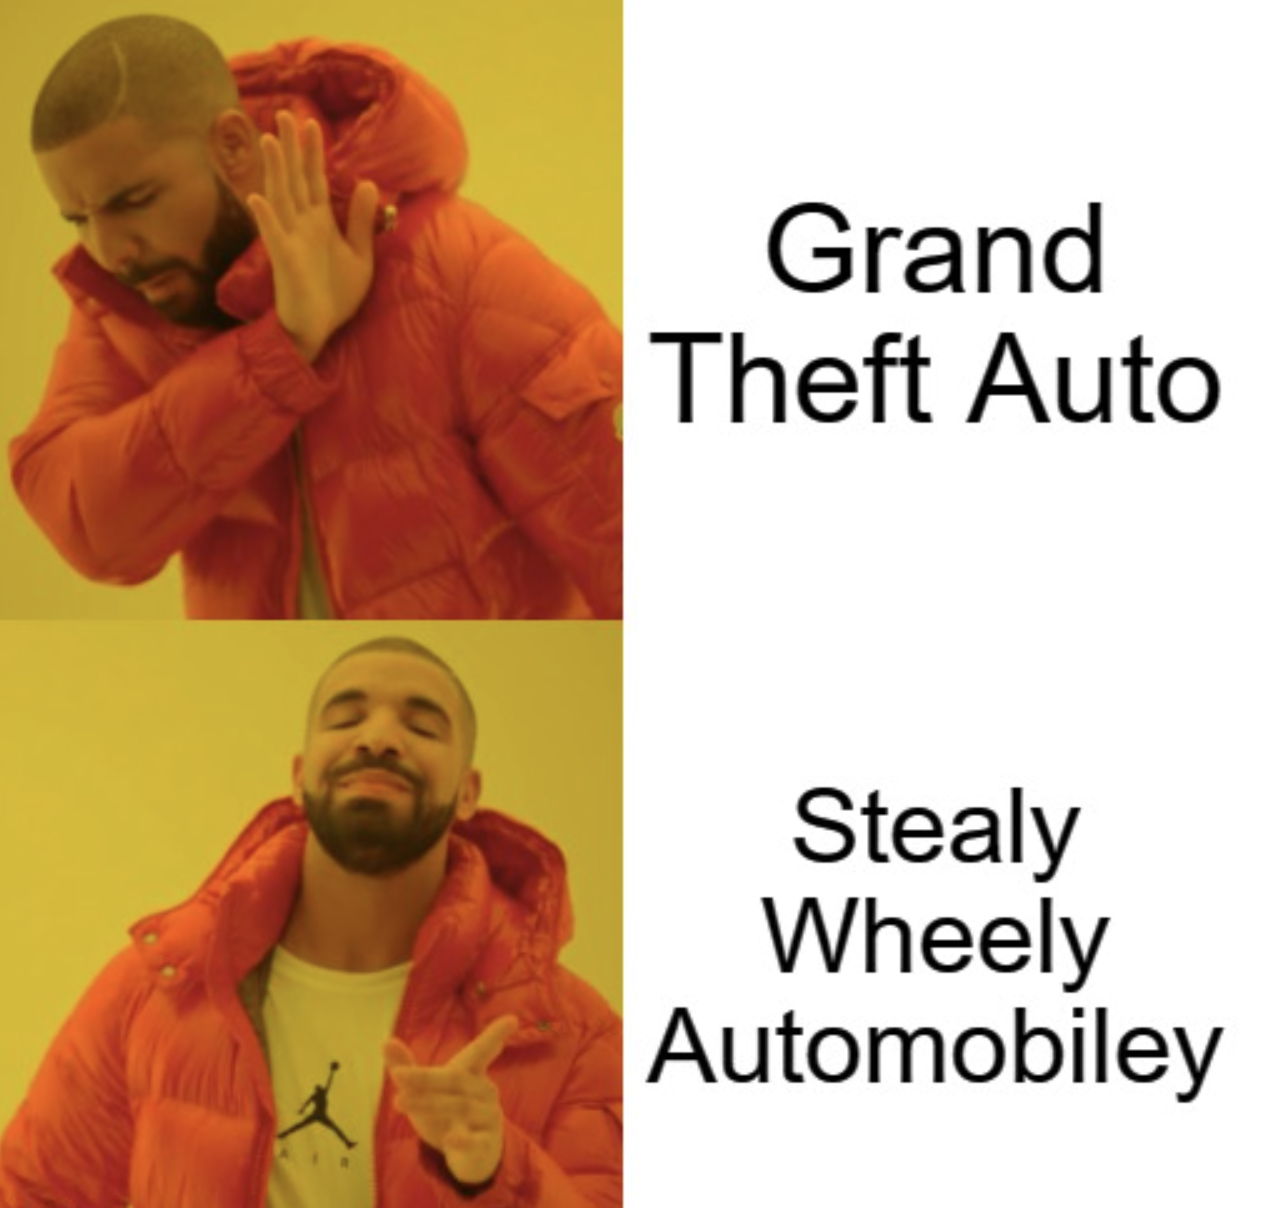 Gaming Memes - drake meme shipping - Grand Theft Auto Stealy Wheely Automobiley